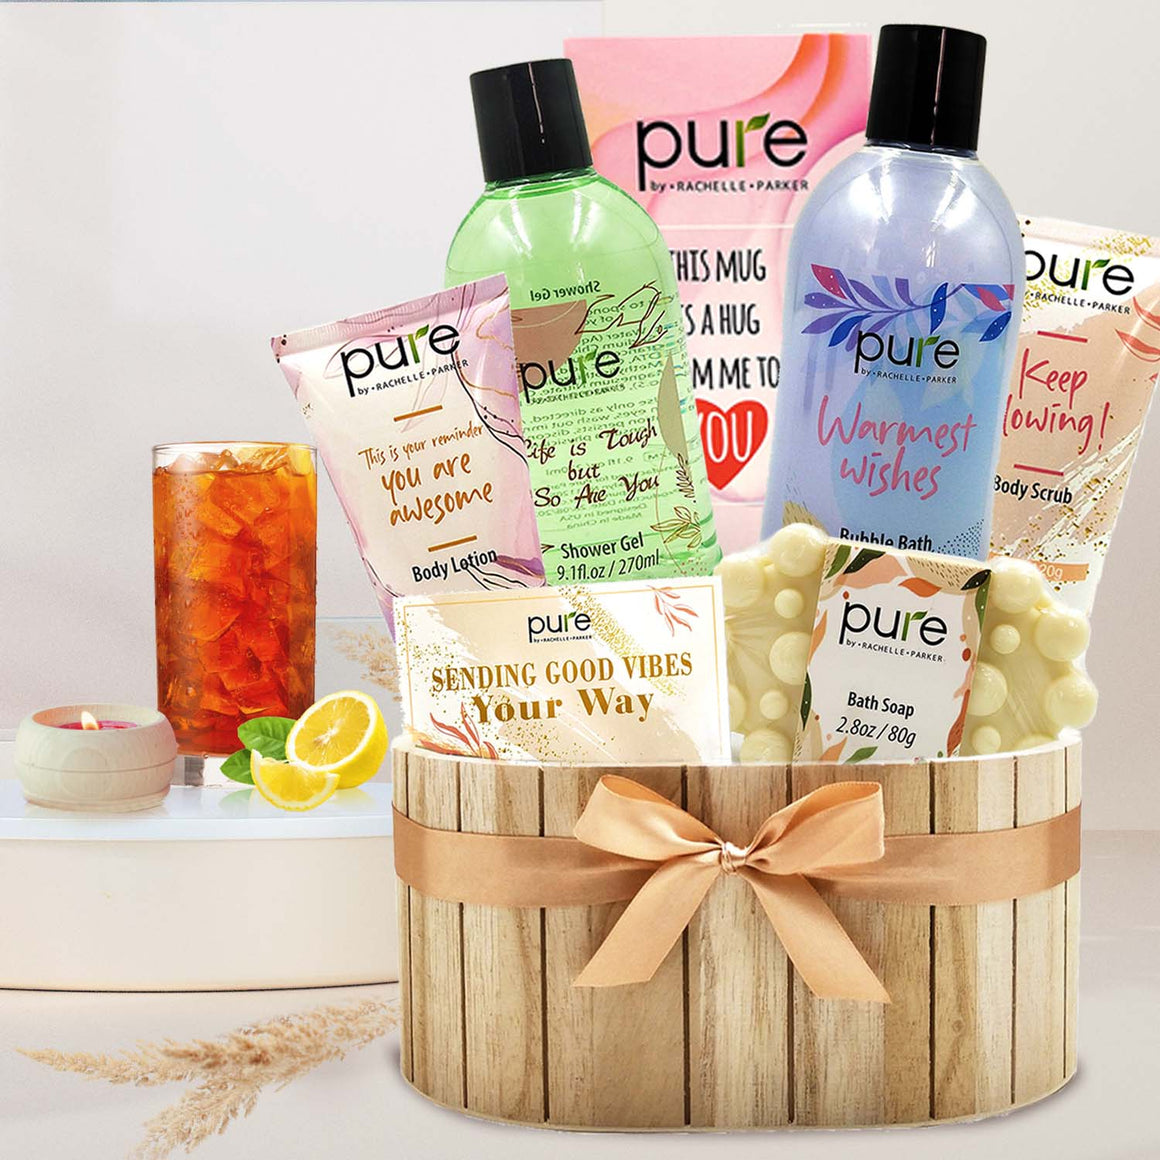 Pampering Good Vibes Gift Basket for Teens, Women 7pcs Get Well Soon Gifts for Women. Self Care Gift Set with Mug, Shower Gel, Soap, Bubble Bath, Body Lotion. Birthday Home Spa Gift Package for Her